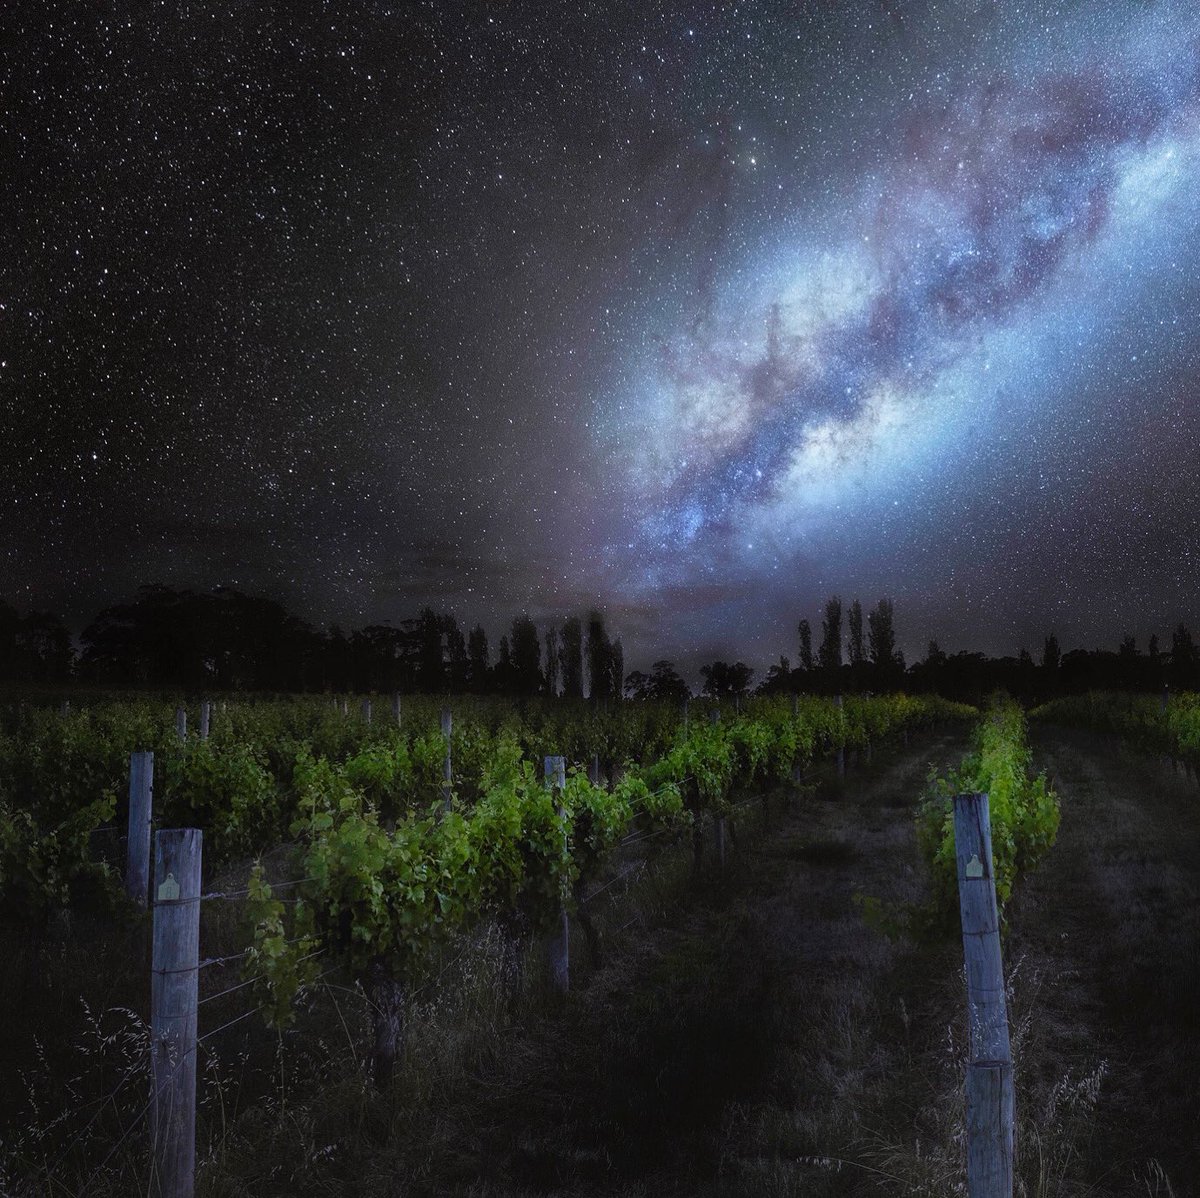 Our brightest star🌟

A vineyard that is nurtured with an attention to detail that embraces our pristine natural environment. The majesty of Luminosa vineyard by night 📸 @renmcgann #vineyardlife